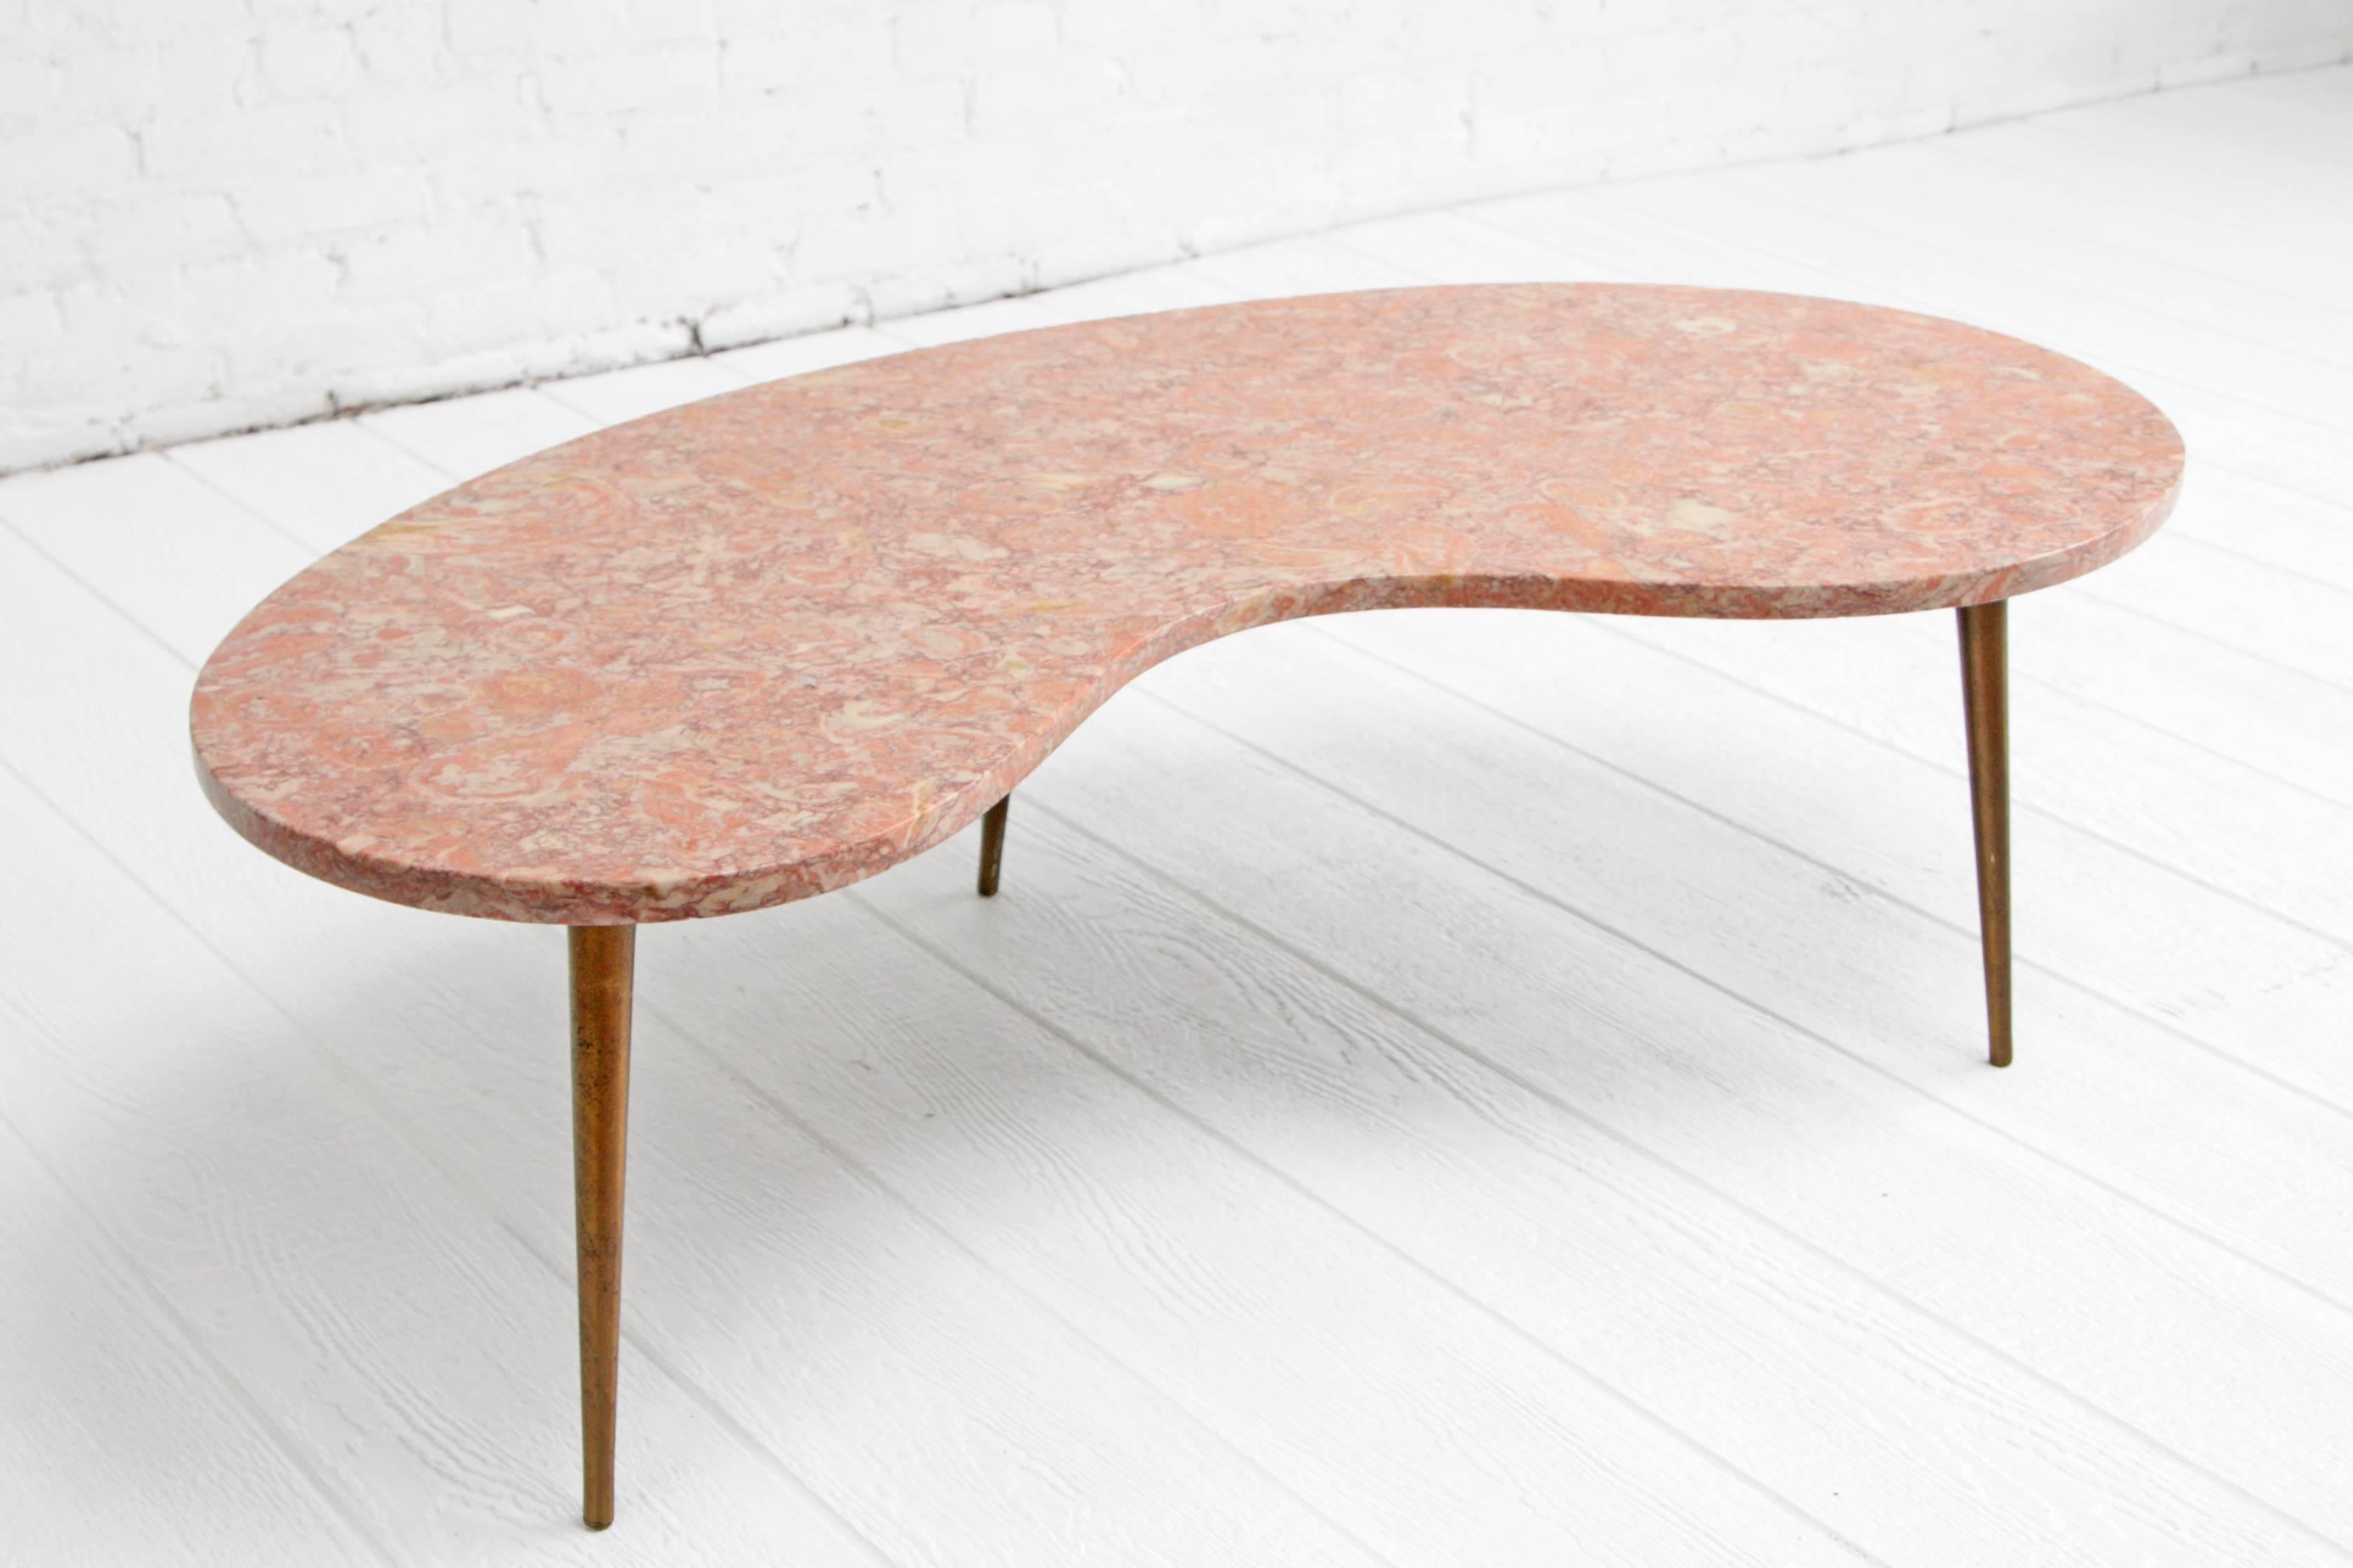 Organic kidney shaped pink marble coffee table. The marble is suspended on three tapered brass legs that are attached to a smaller kidney shaped wood base.